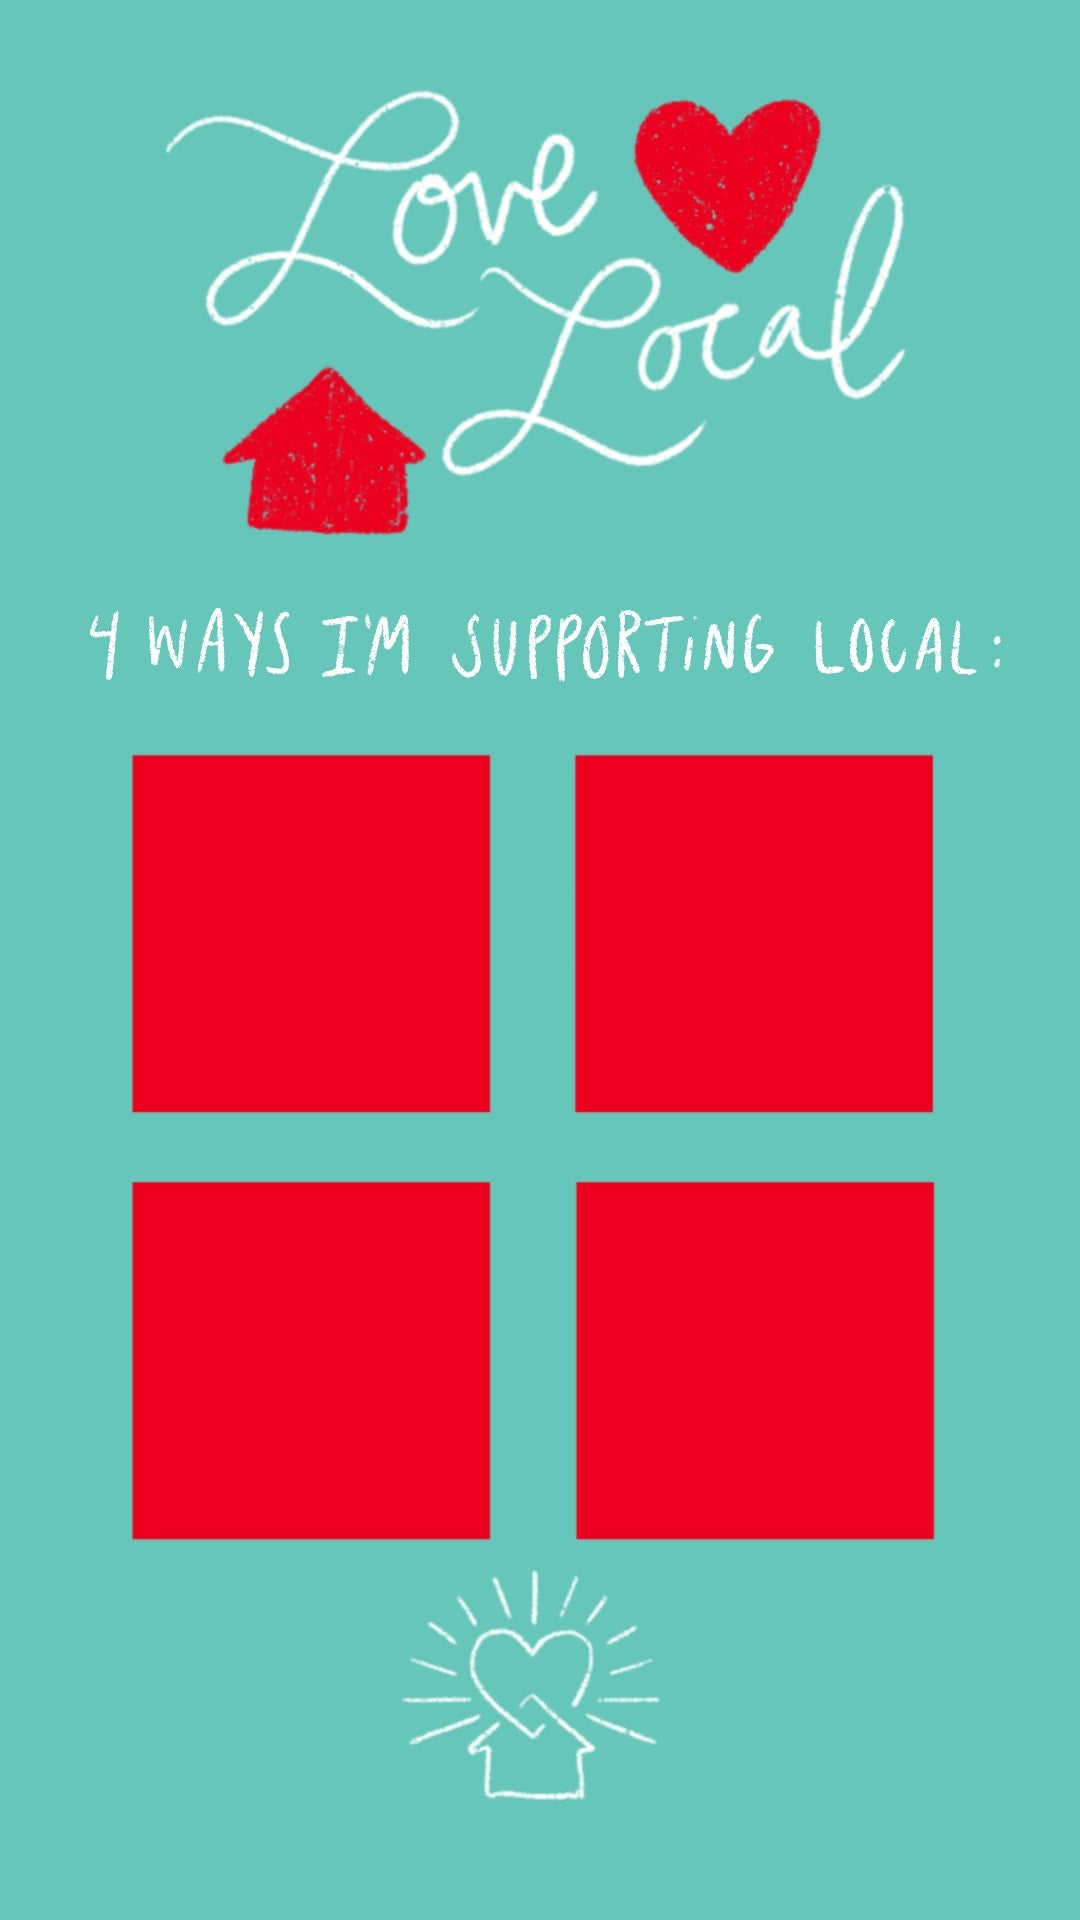 Fun Ways To Support Local on Social Media